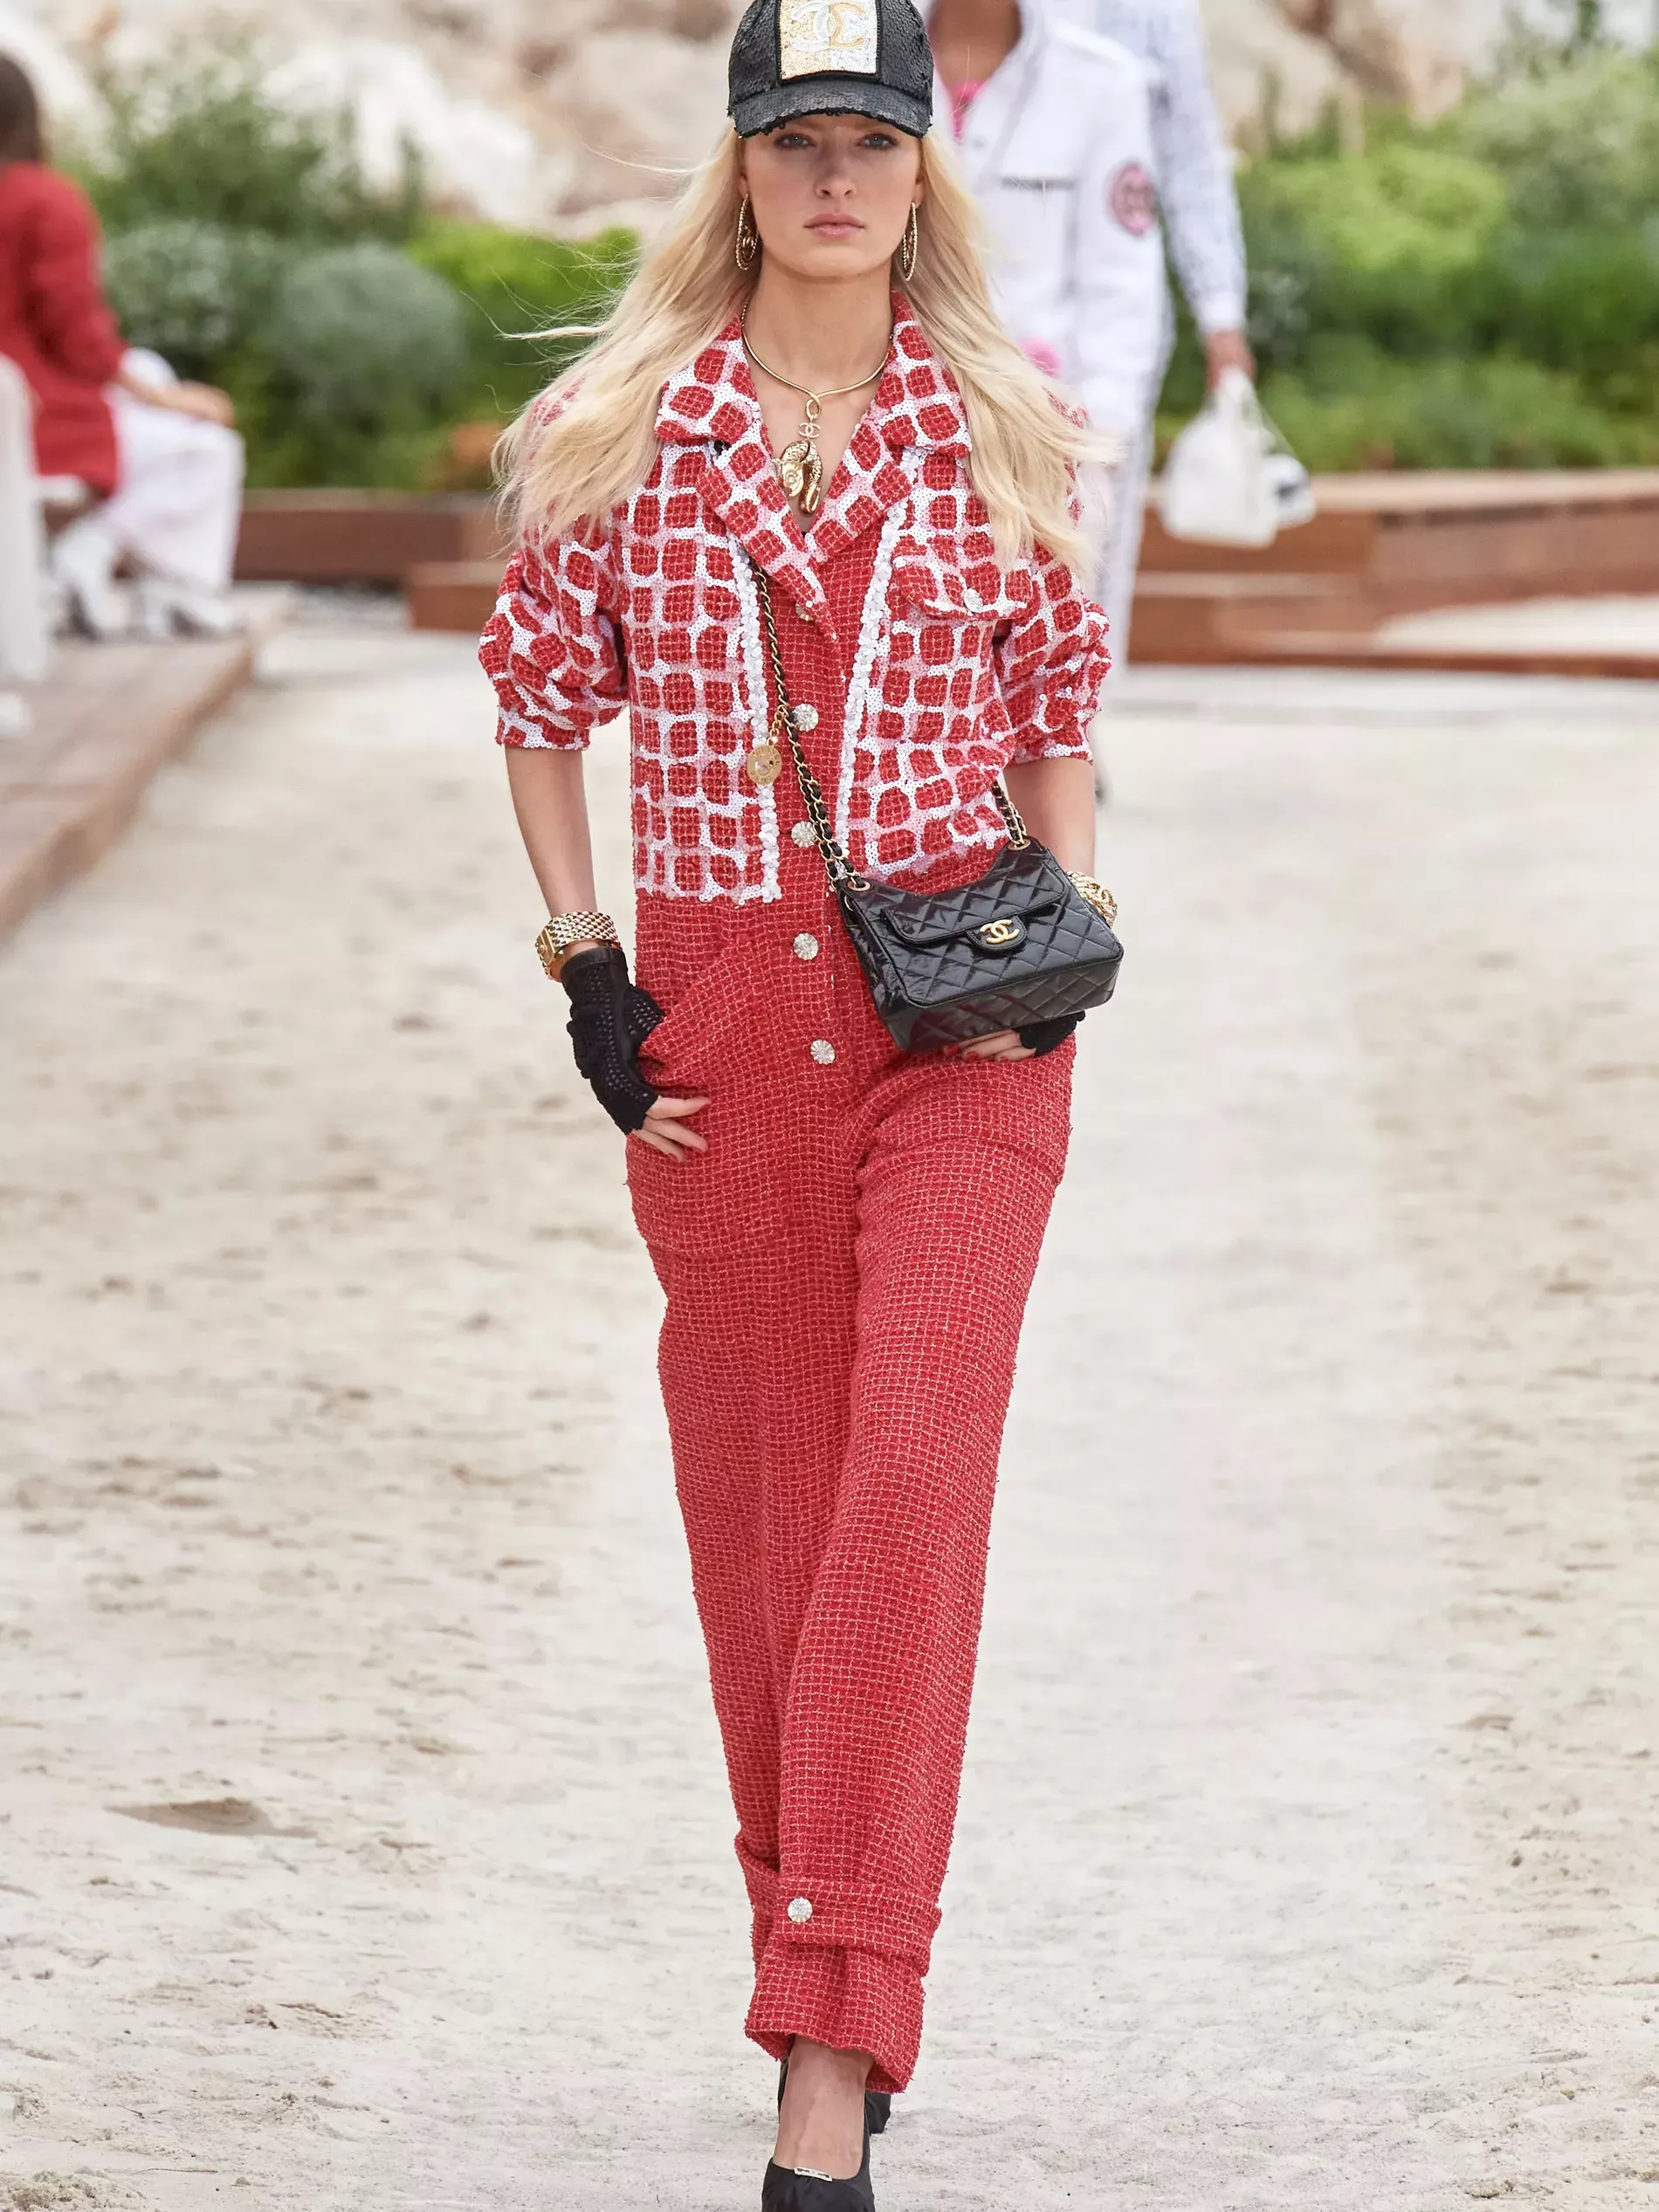 2023 Cruise Resort Collection: As soon as the tennis racket handbag debuts,  it becomes the focus of CHANEL's big show!